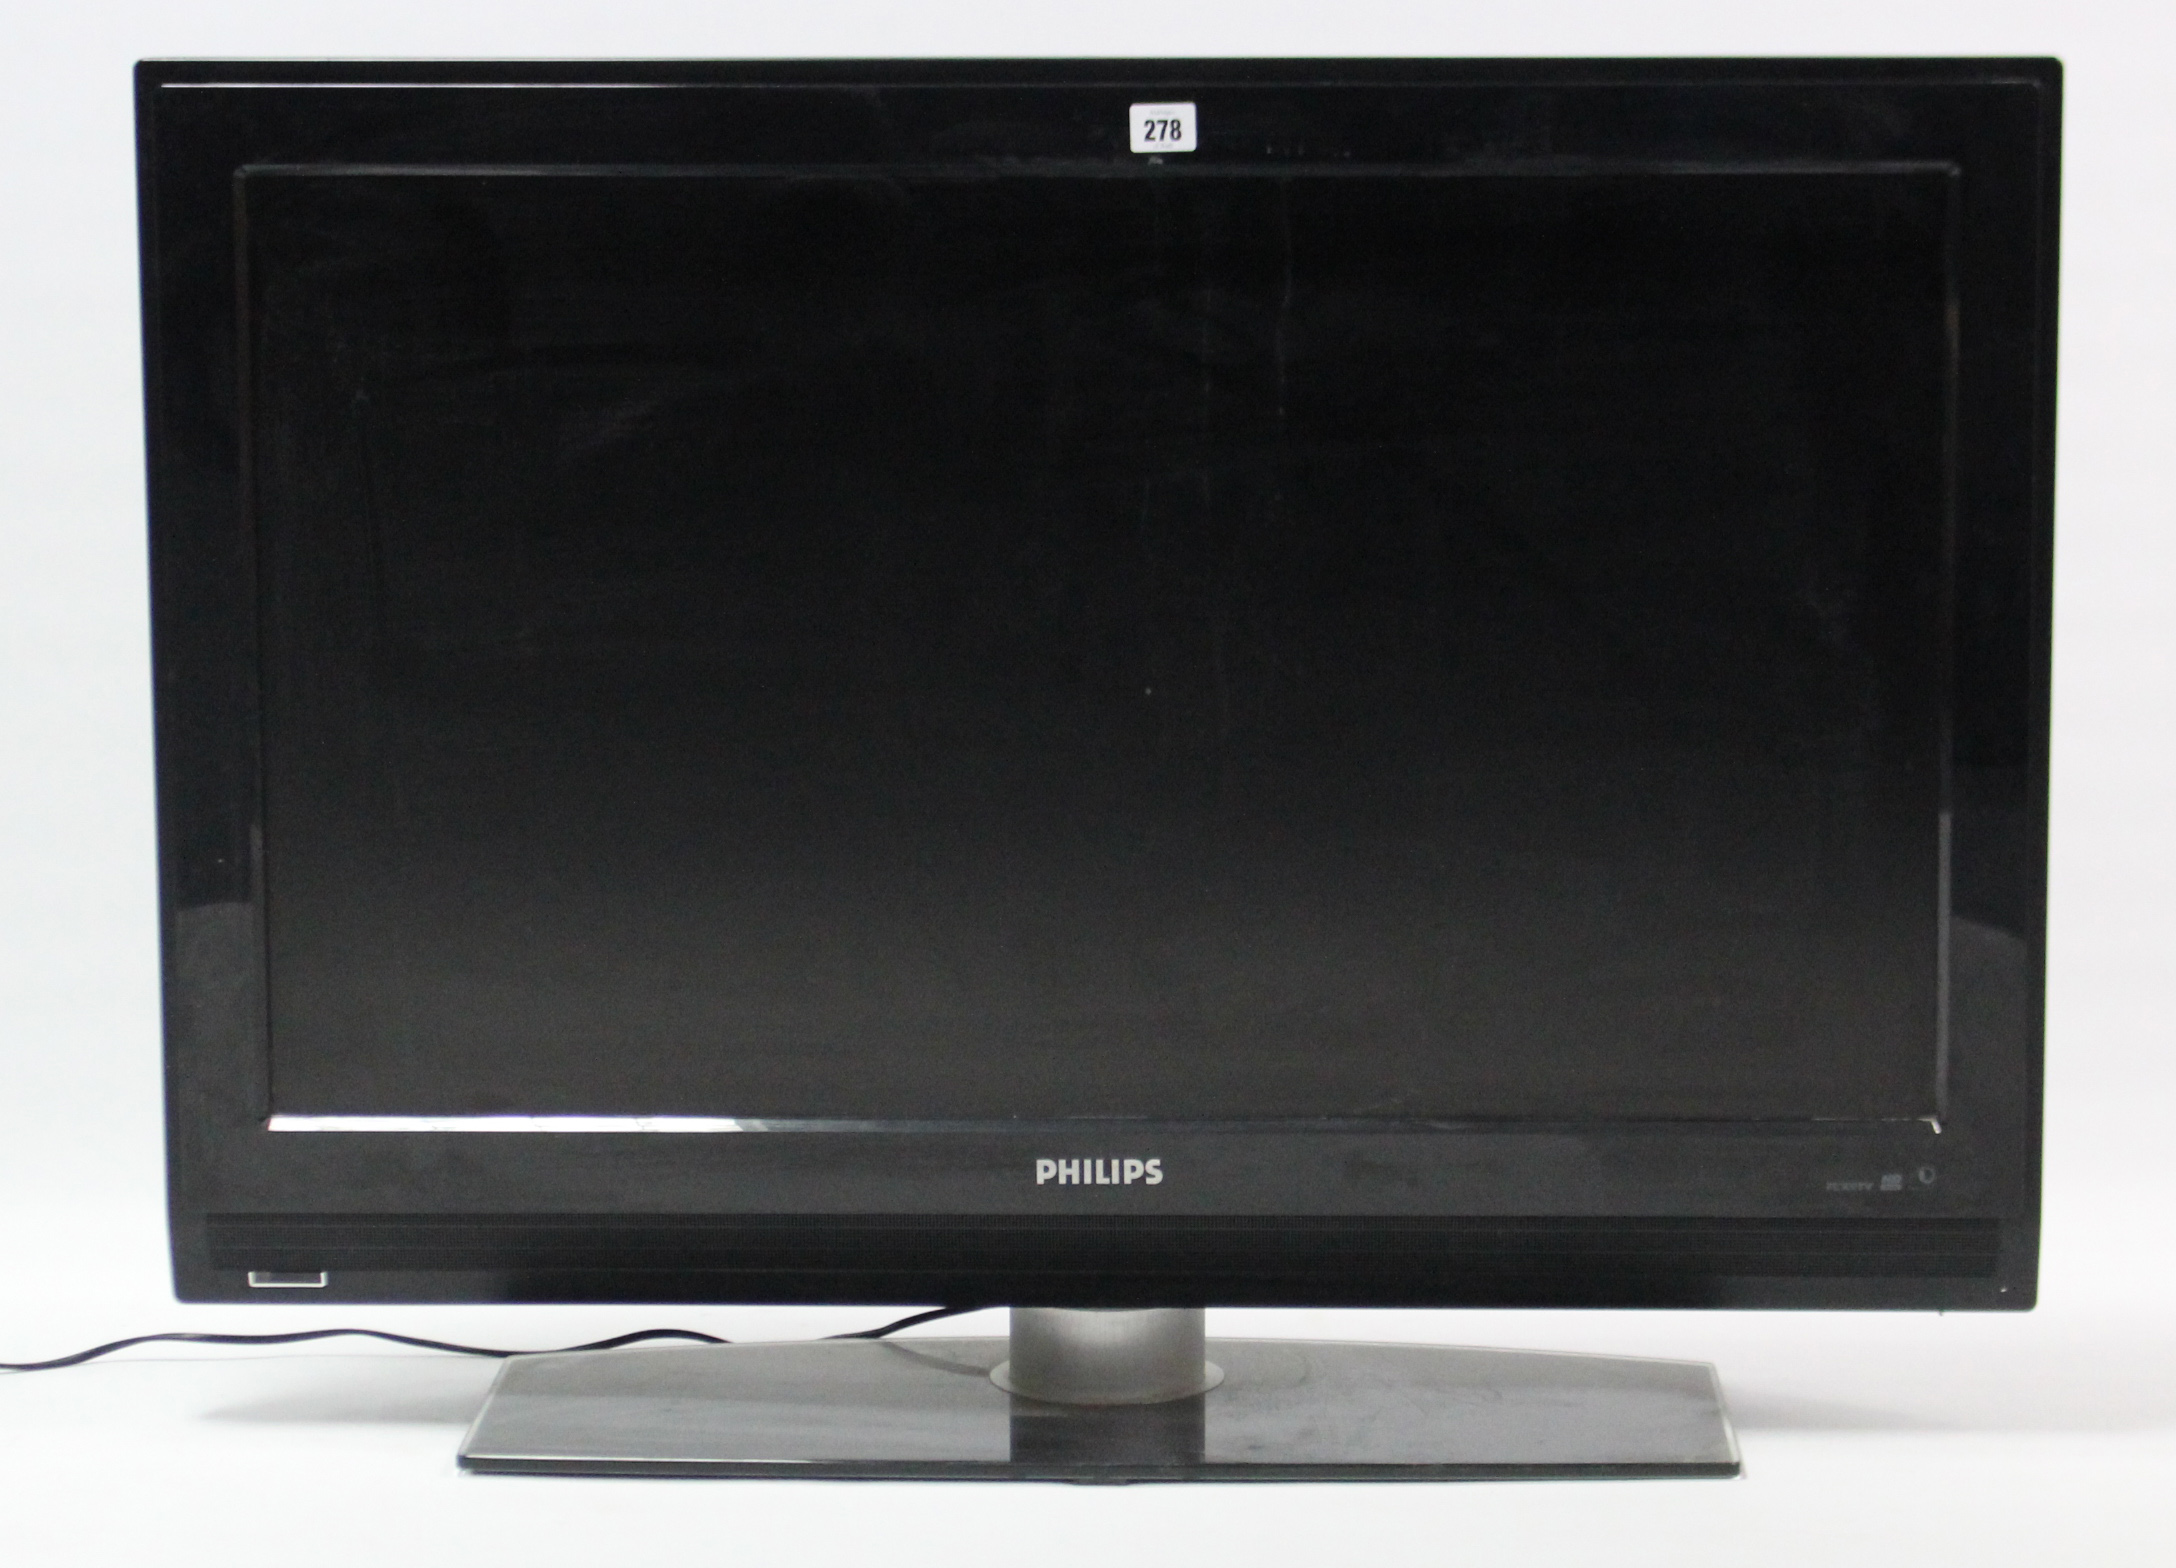 A Philips 37” colour television.